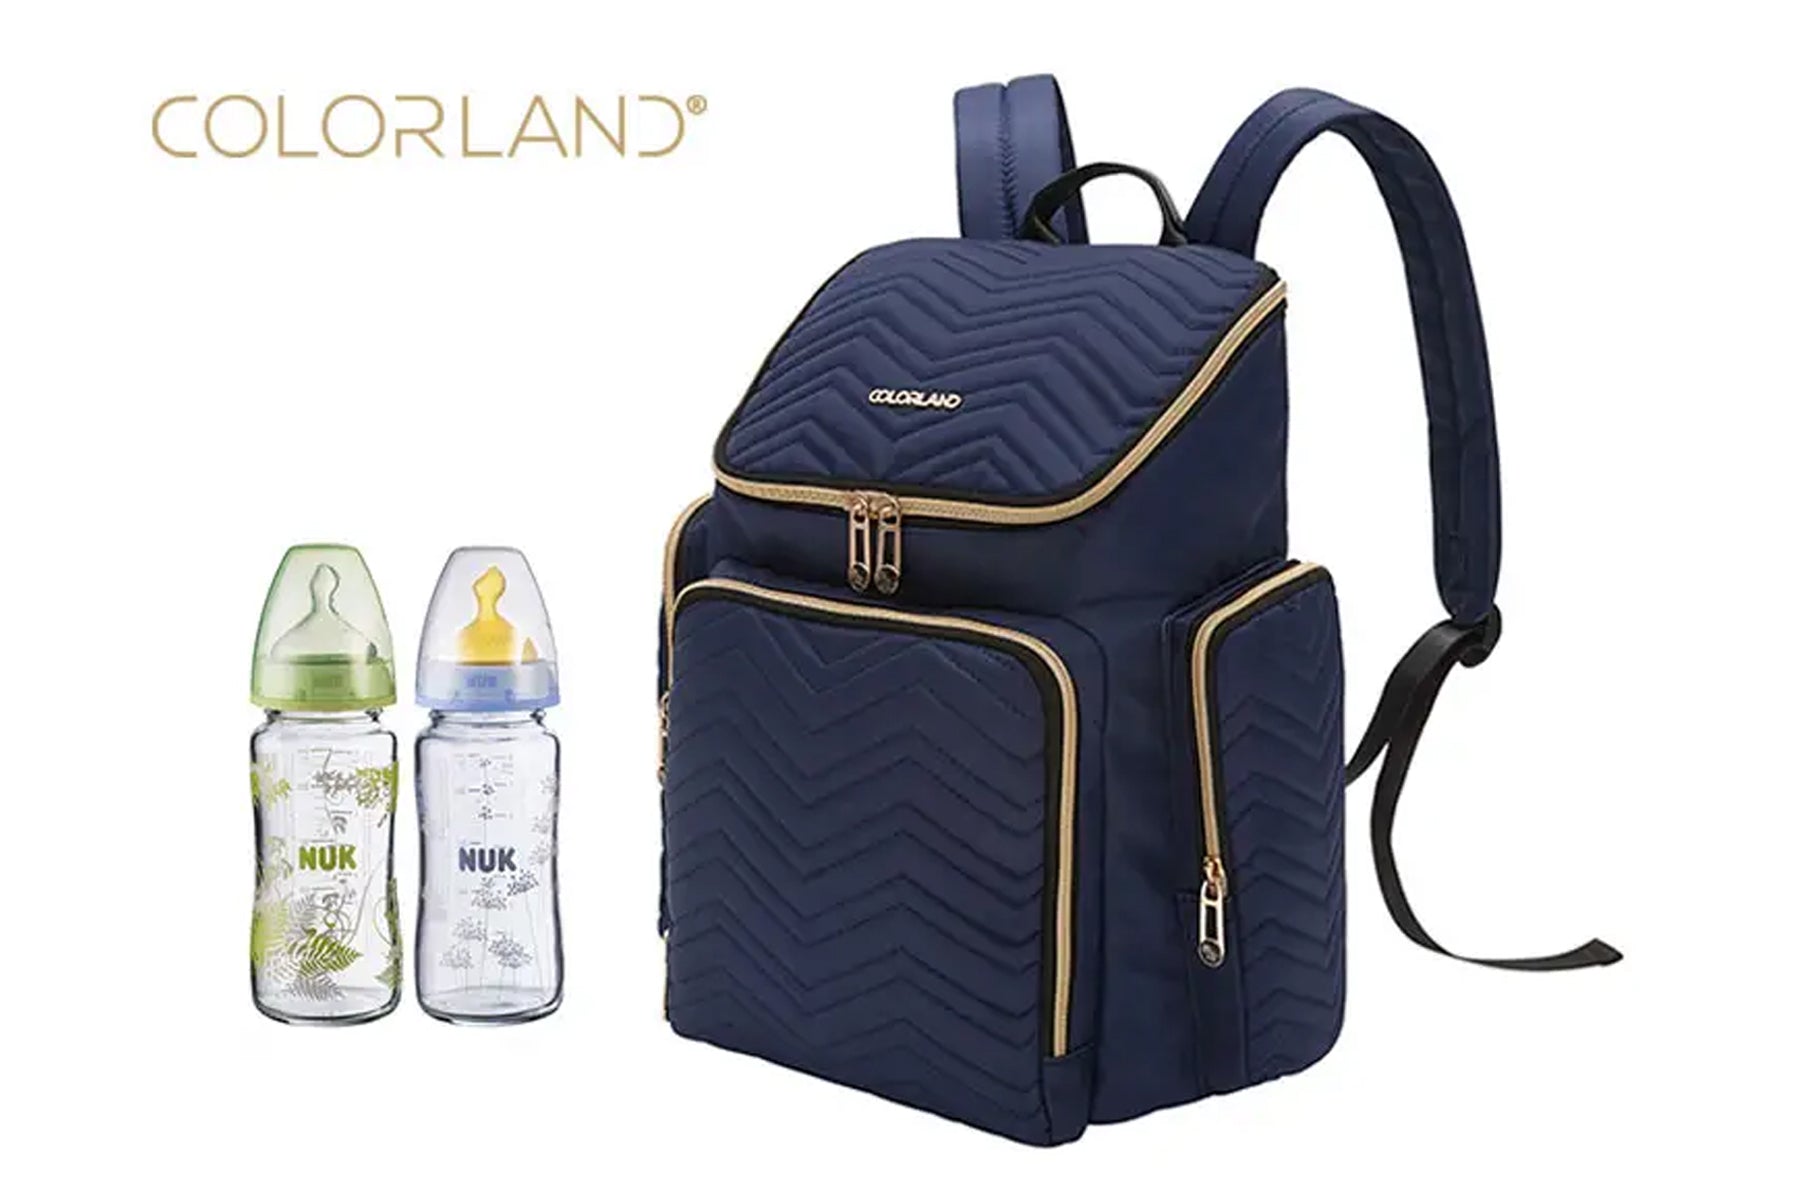 COLORLAND MOTHER BAG - 31247